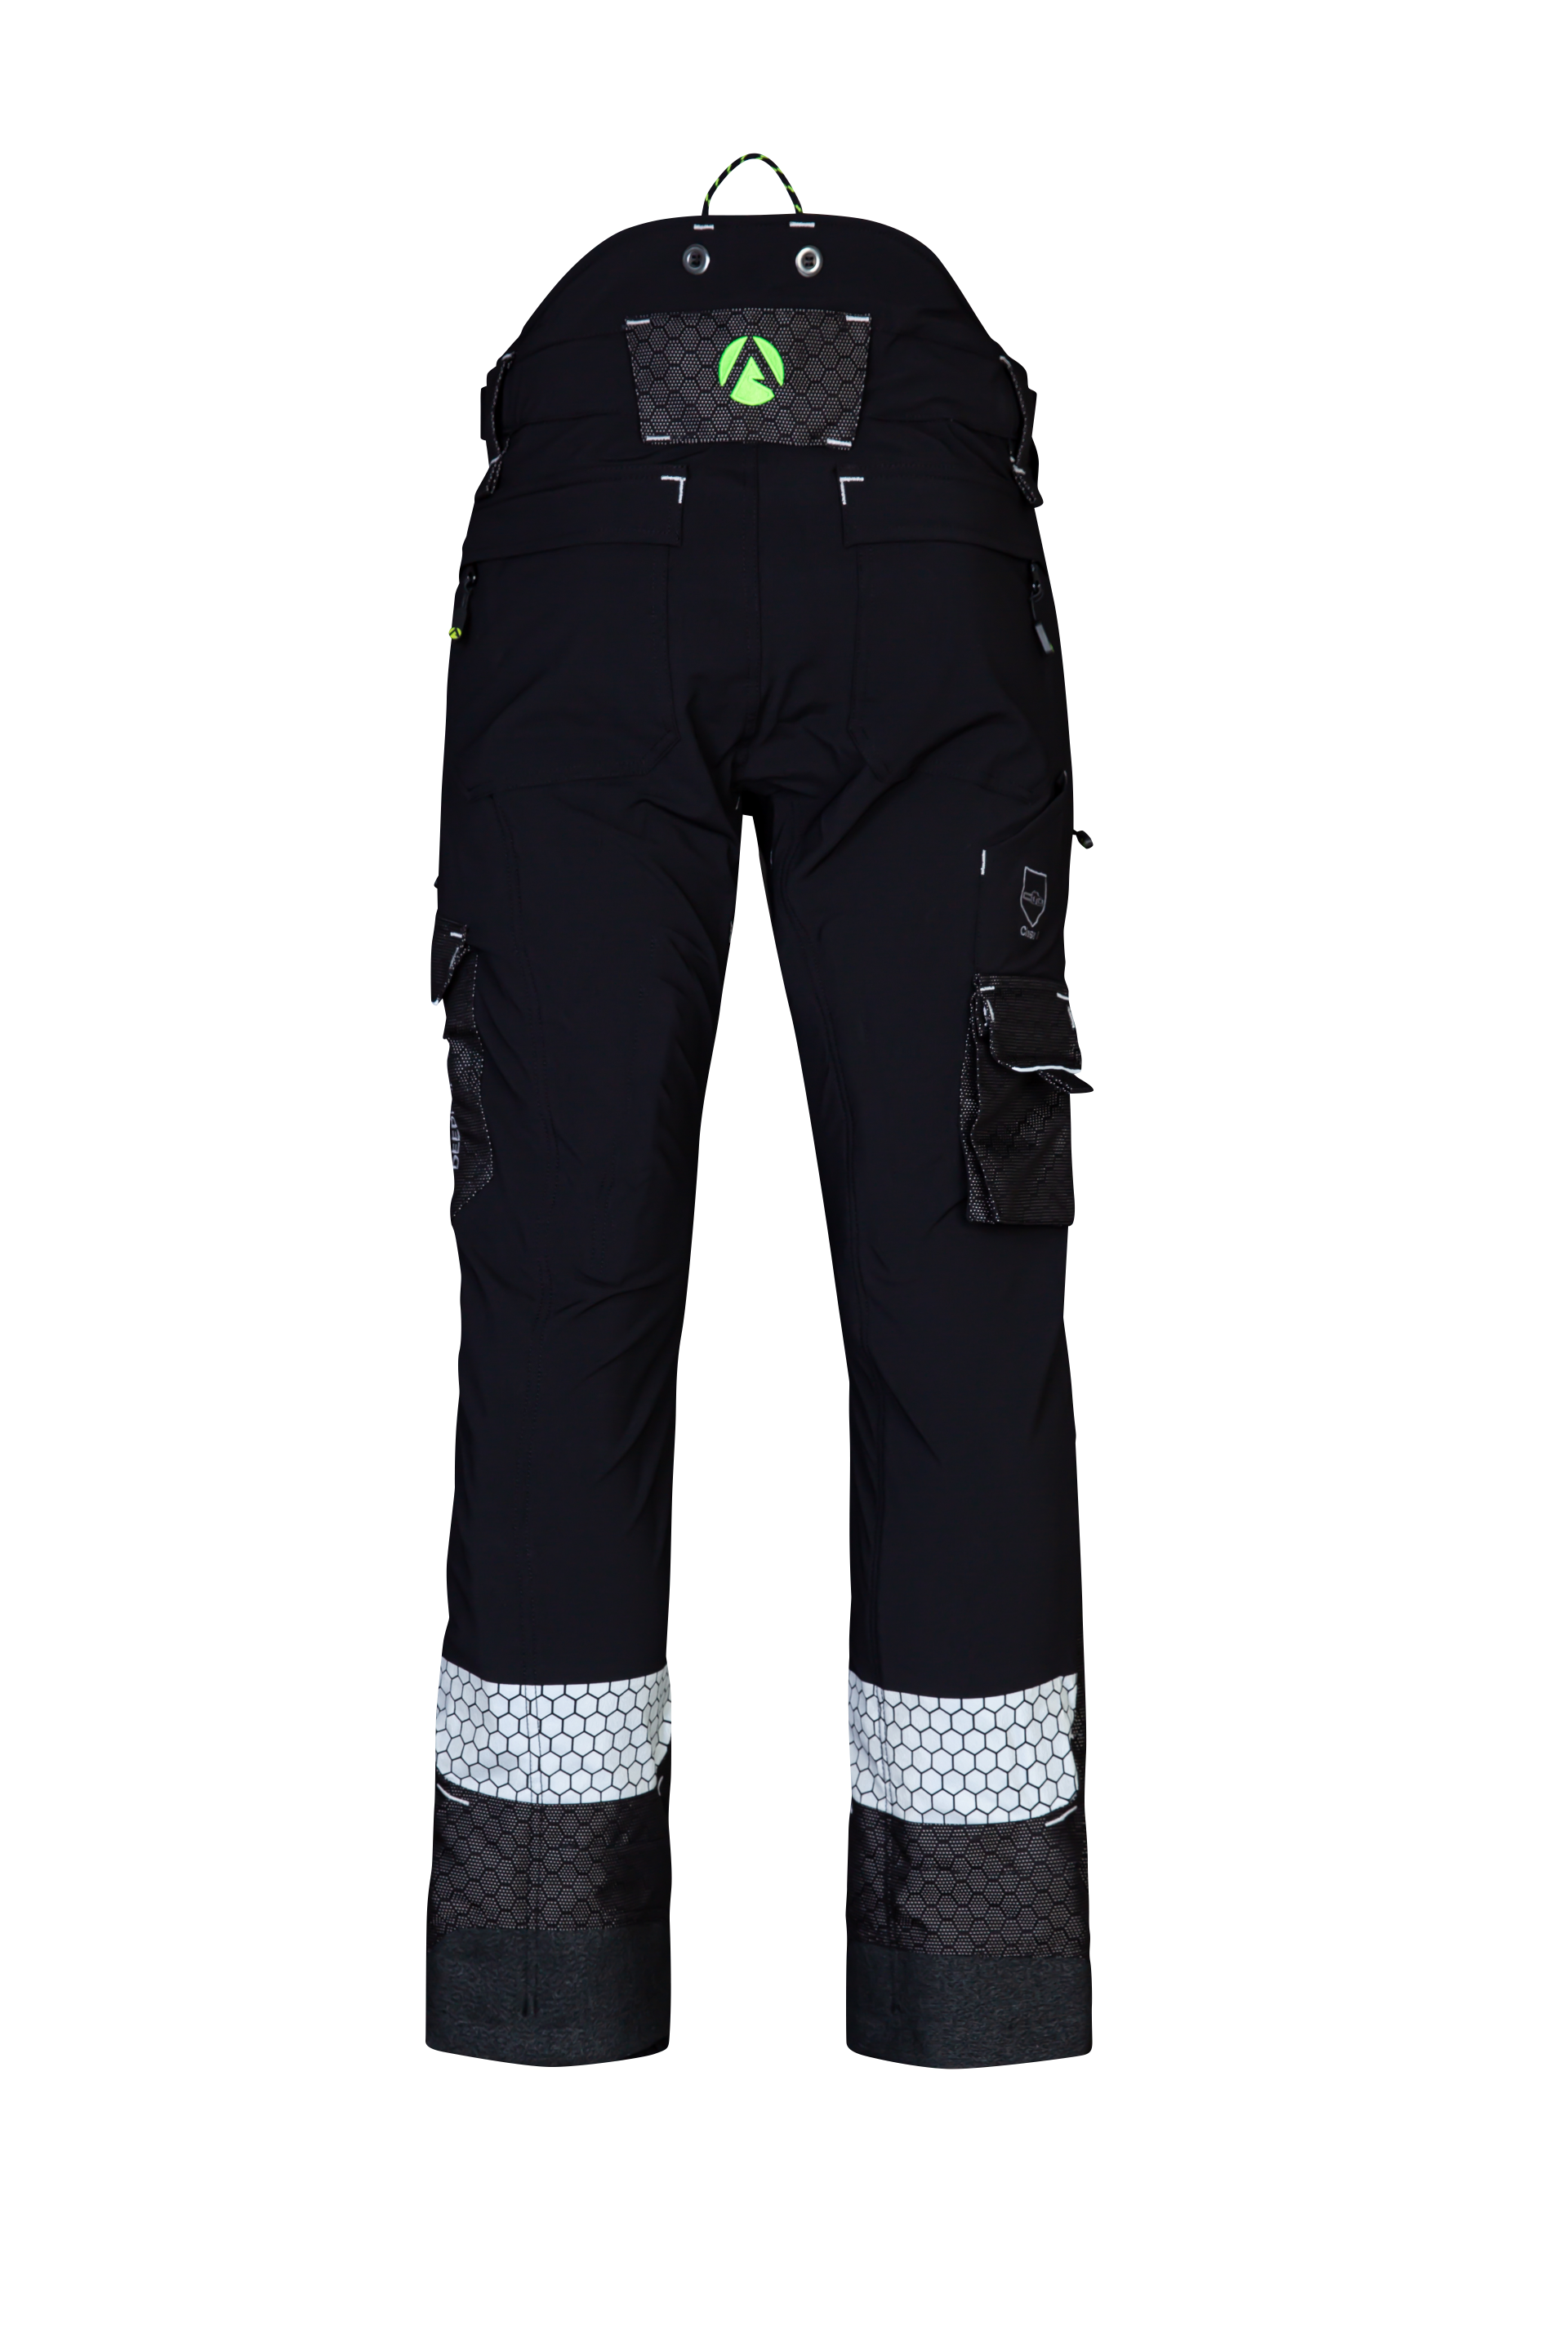 AT4090 - Arbortec Deep Forest Chainsaw Trousers Design C/Class 1 - Black